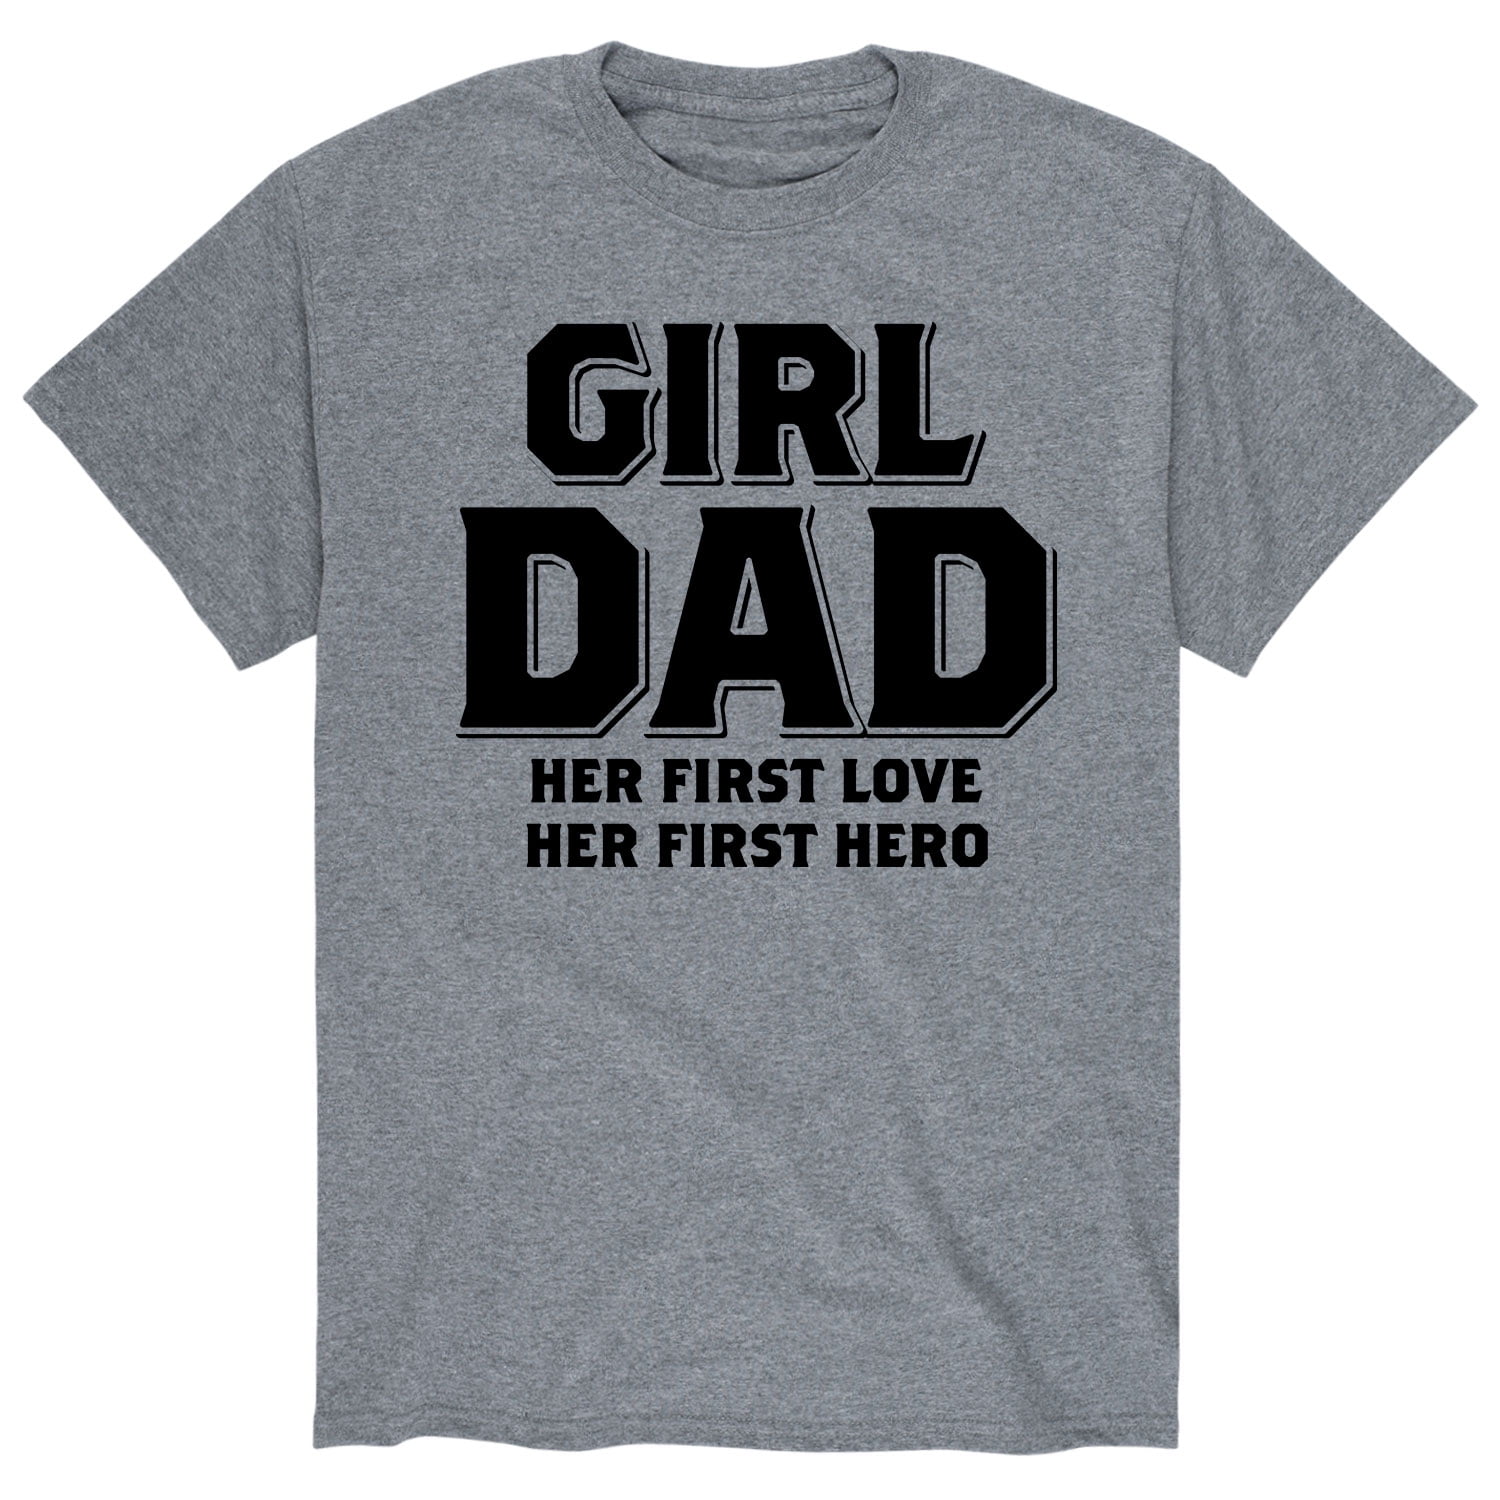 DAD AND DAUGHTER Love Power Short-Sleeve Unisex T-Shirt